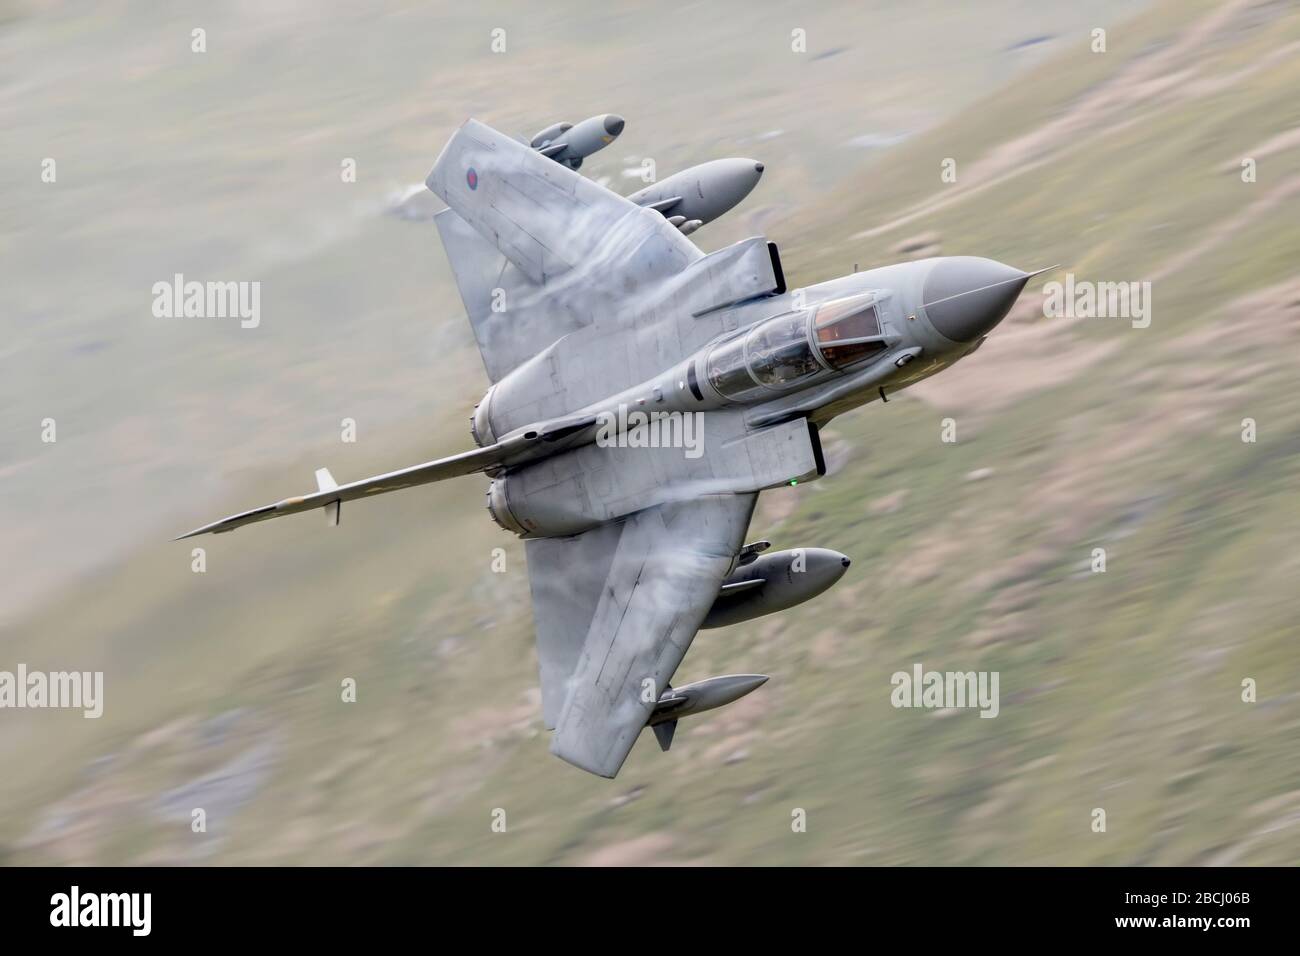 Royal Air Force Tornado GR4 strike attack fighter flying fast and low at low level through a valley with wings sweet back. High speed vapours Stock Photo